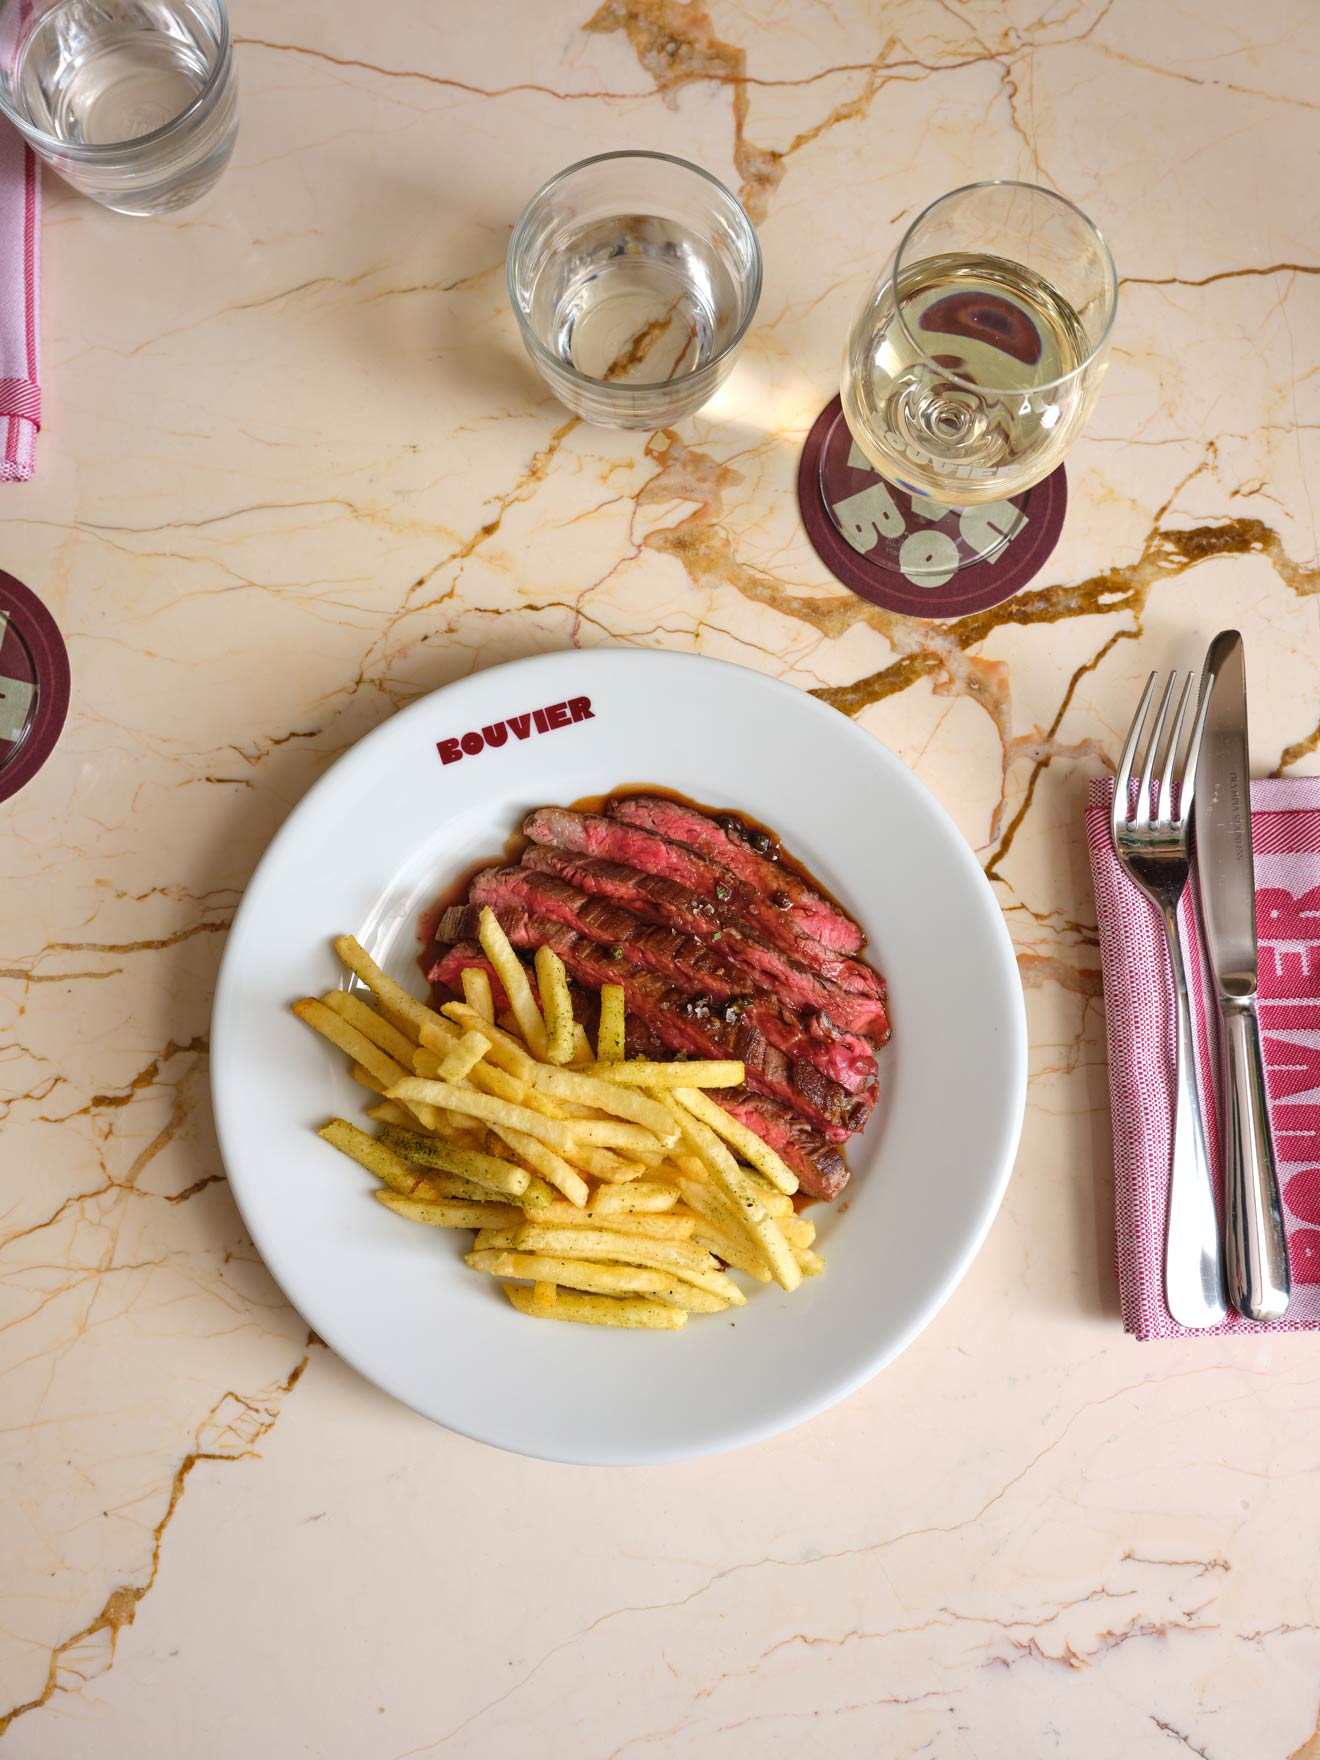 Steak and fries, served on a plate with a glass of wine